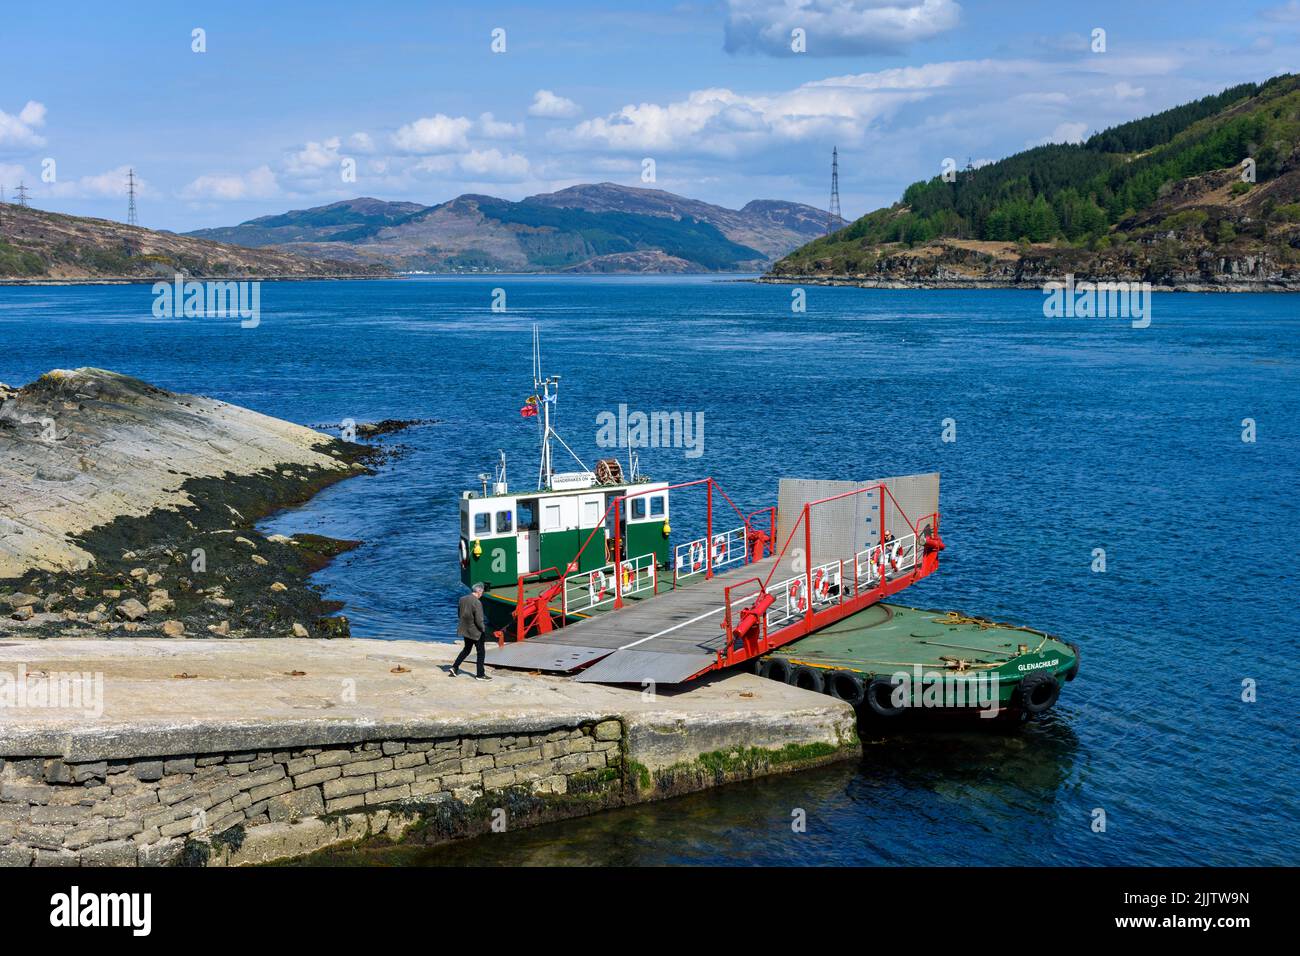 The Glenelg to Kylerhea Ferry (the Glenachulish) which crosses the Kyle Rhea straits to the Isle of Skye, Highland Region, Scotland, UK. At Kylerhea. Stock Photo